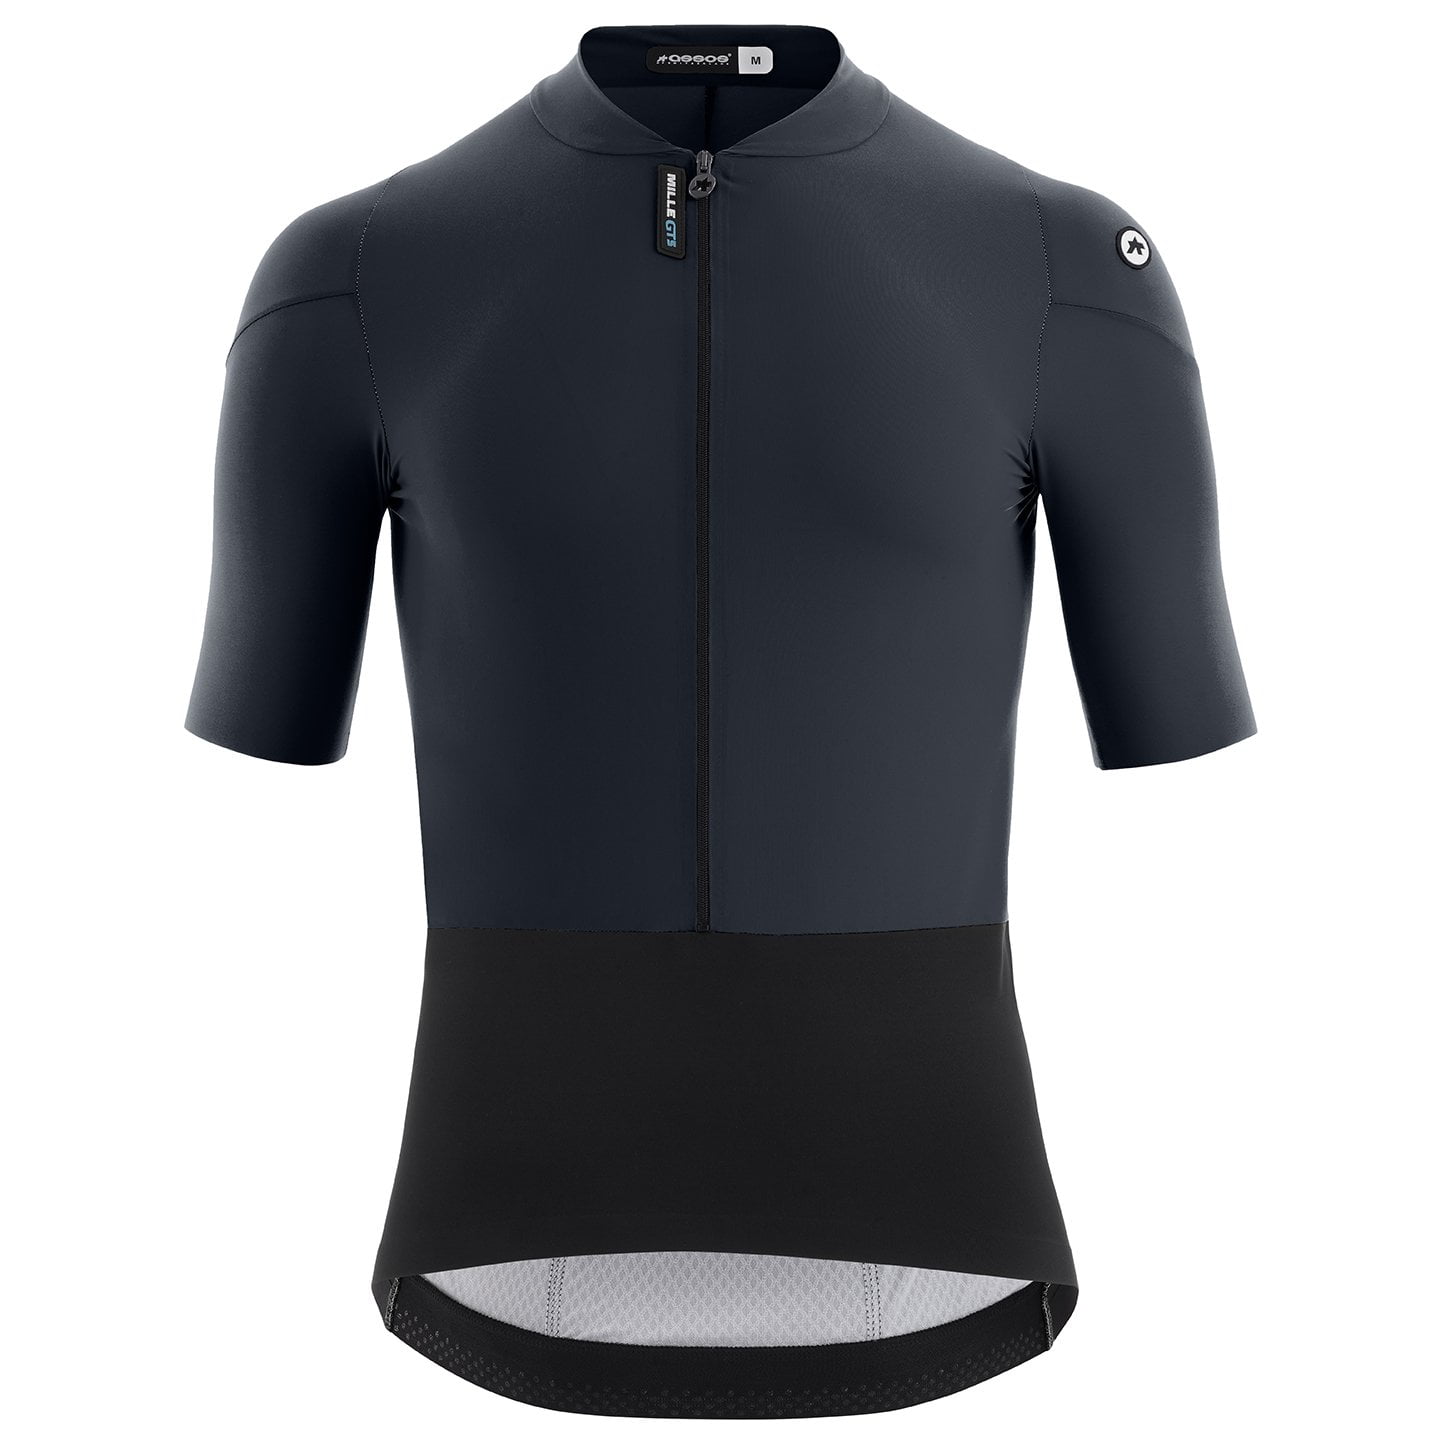 ASSOS Mille GTS C2 Short Sleeve Jersey Short Sleeve Jersey, for men, size 2XL, Cycling jersey, Cycle clothing